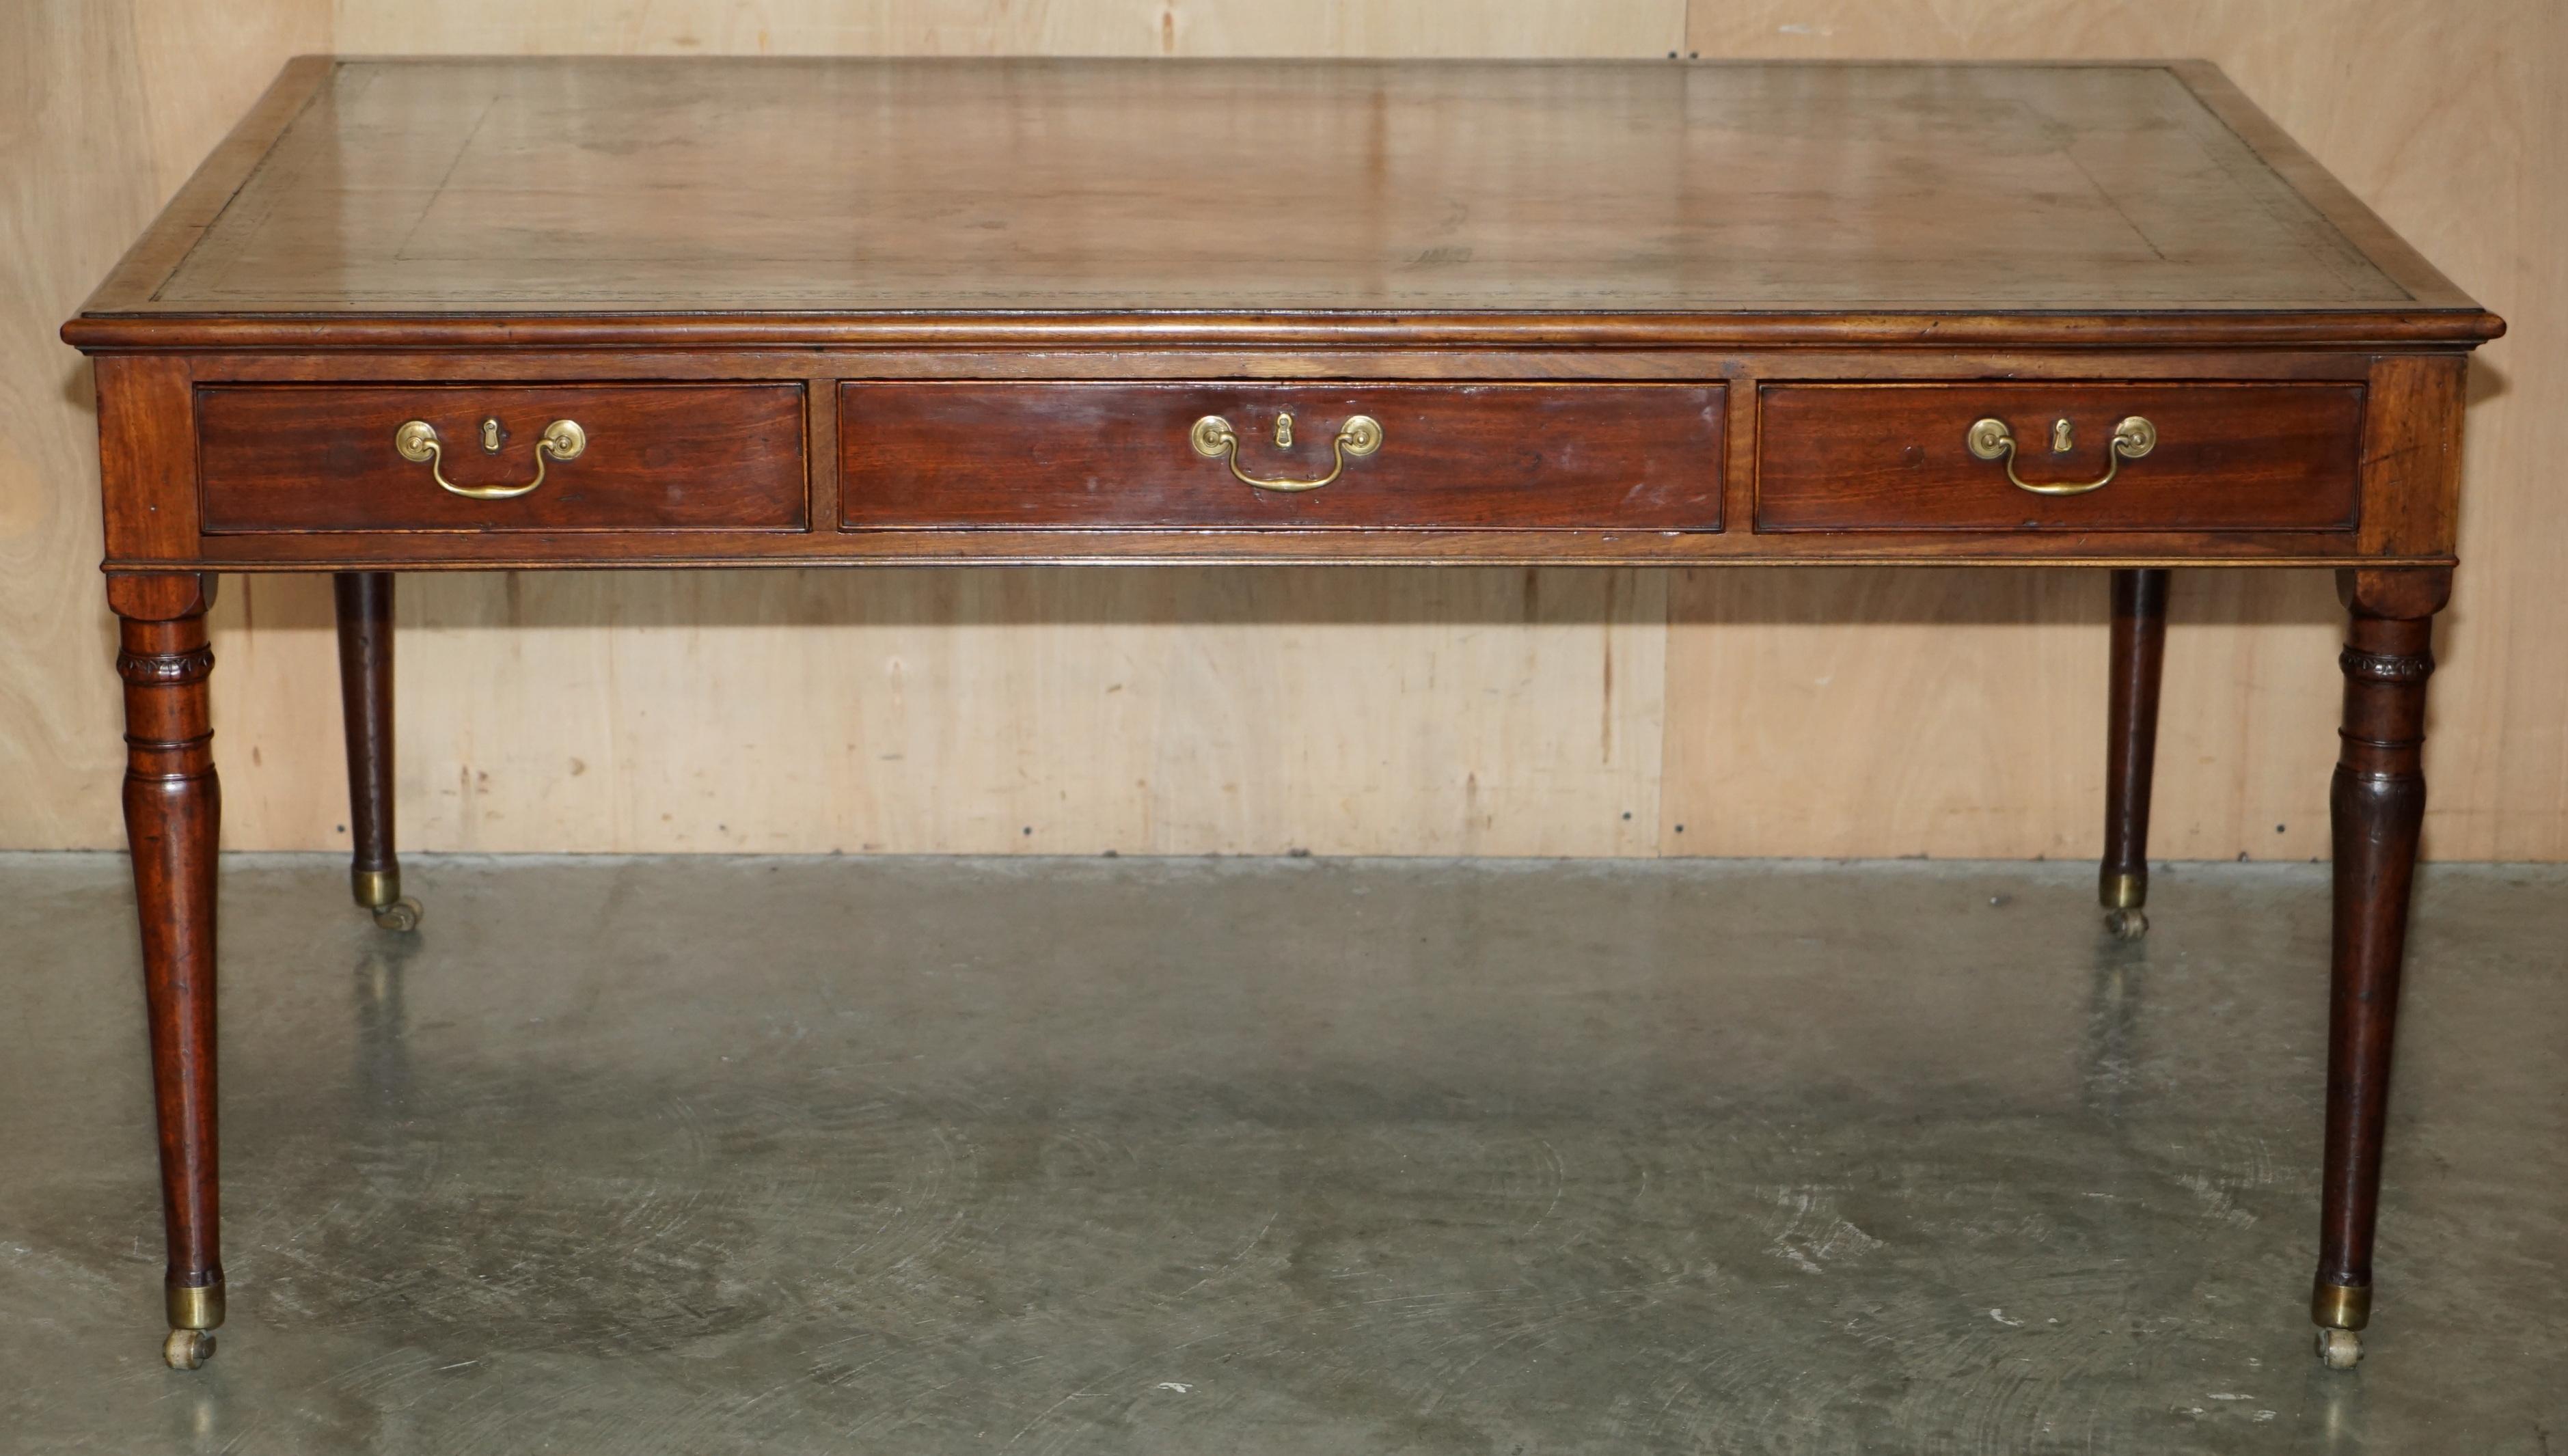 EXQUISITE ANTiQUE GEORGIAN IRISH 1780 RESTORED BROWN LEATHER WRITING TABLE DESK For Sale 8